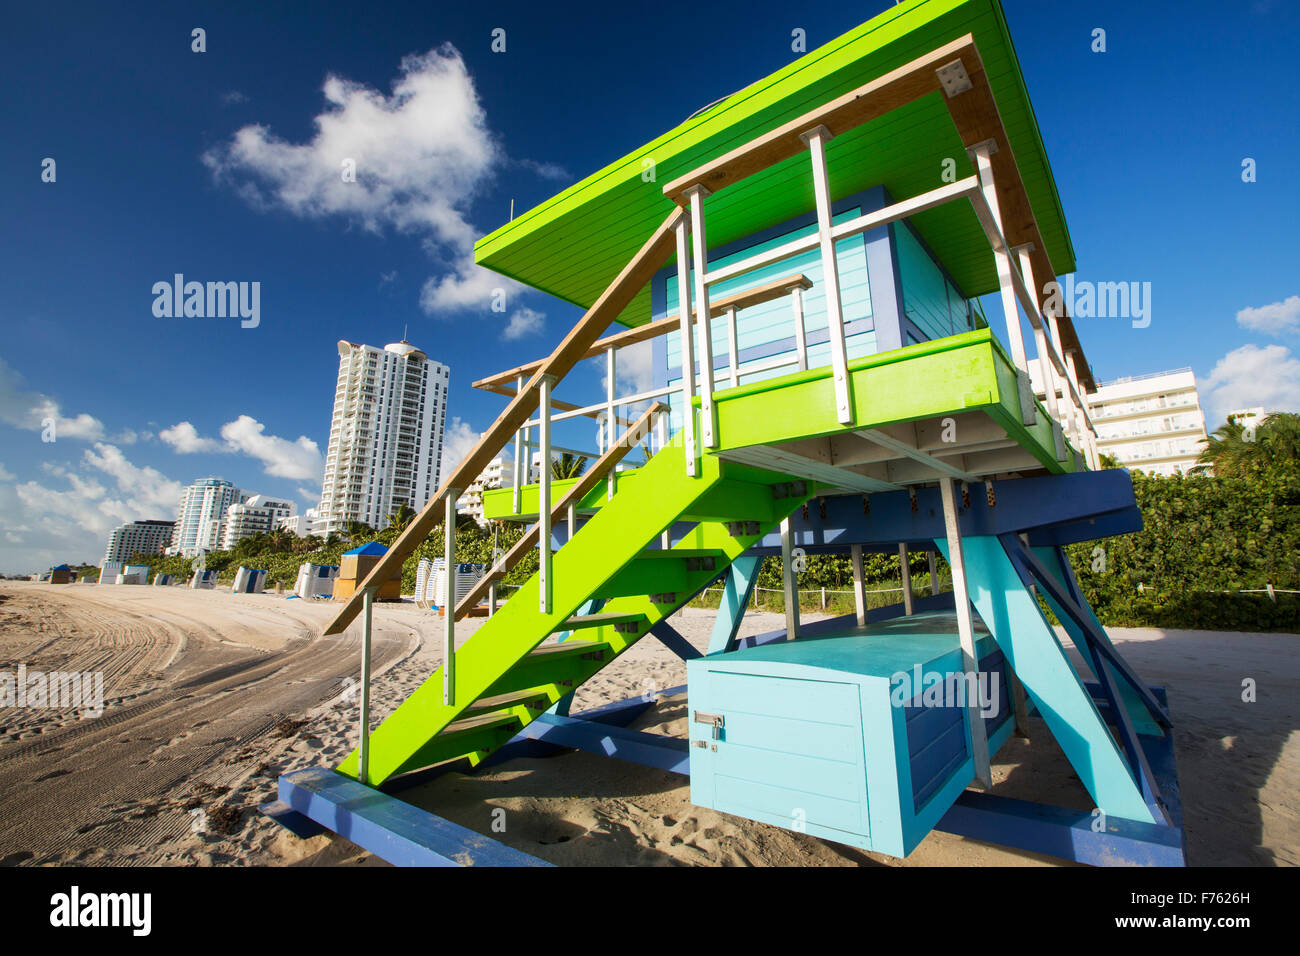 A coast watch hut on Miami Beach, florida, USA. The Florida coastline is highly developed and low lying making it very vulnerable to sea level rise. Stock Photo